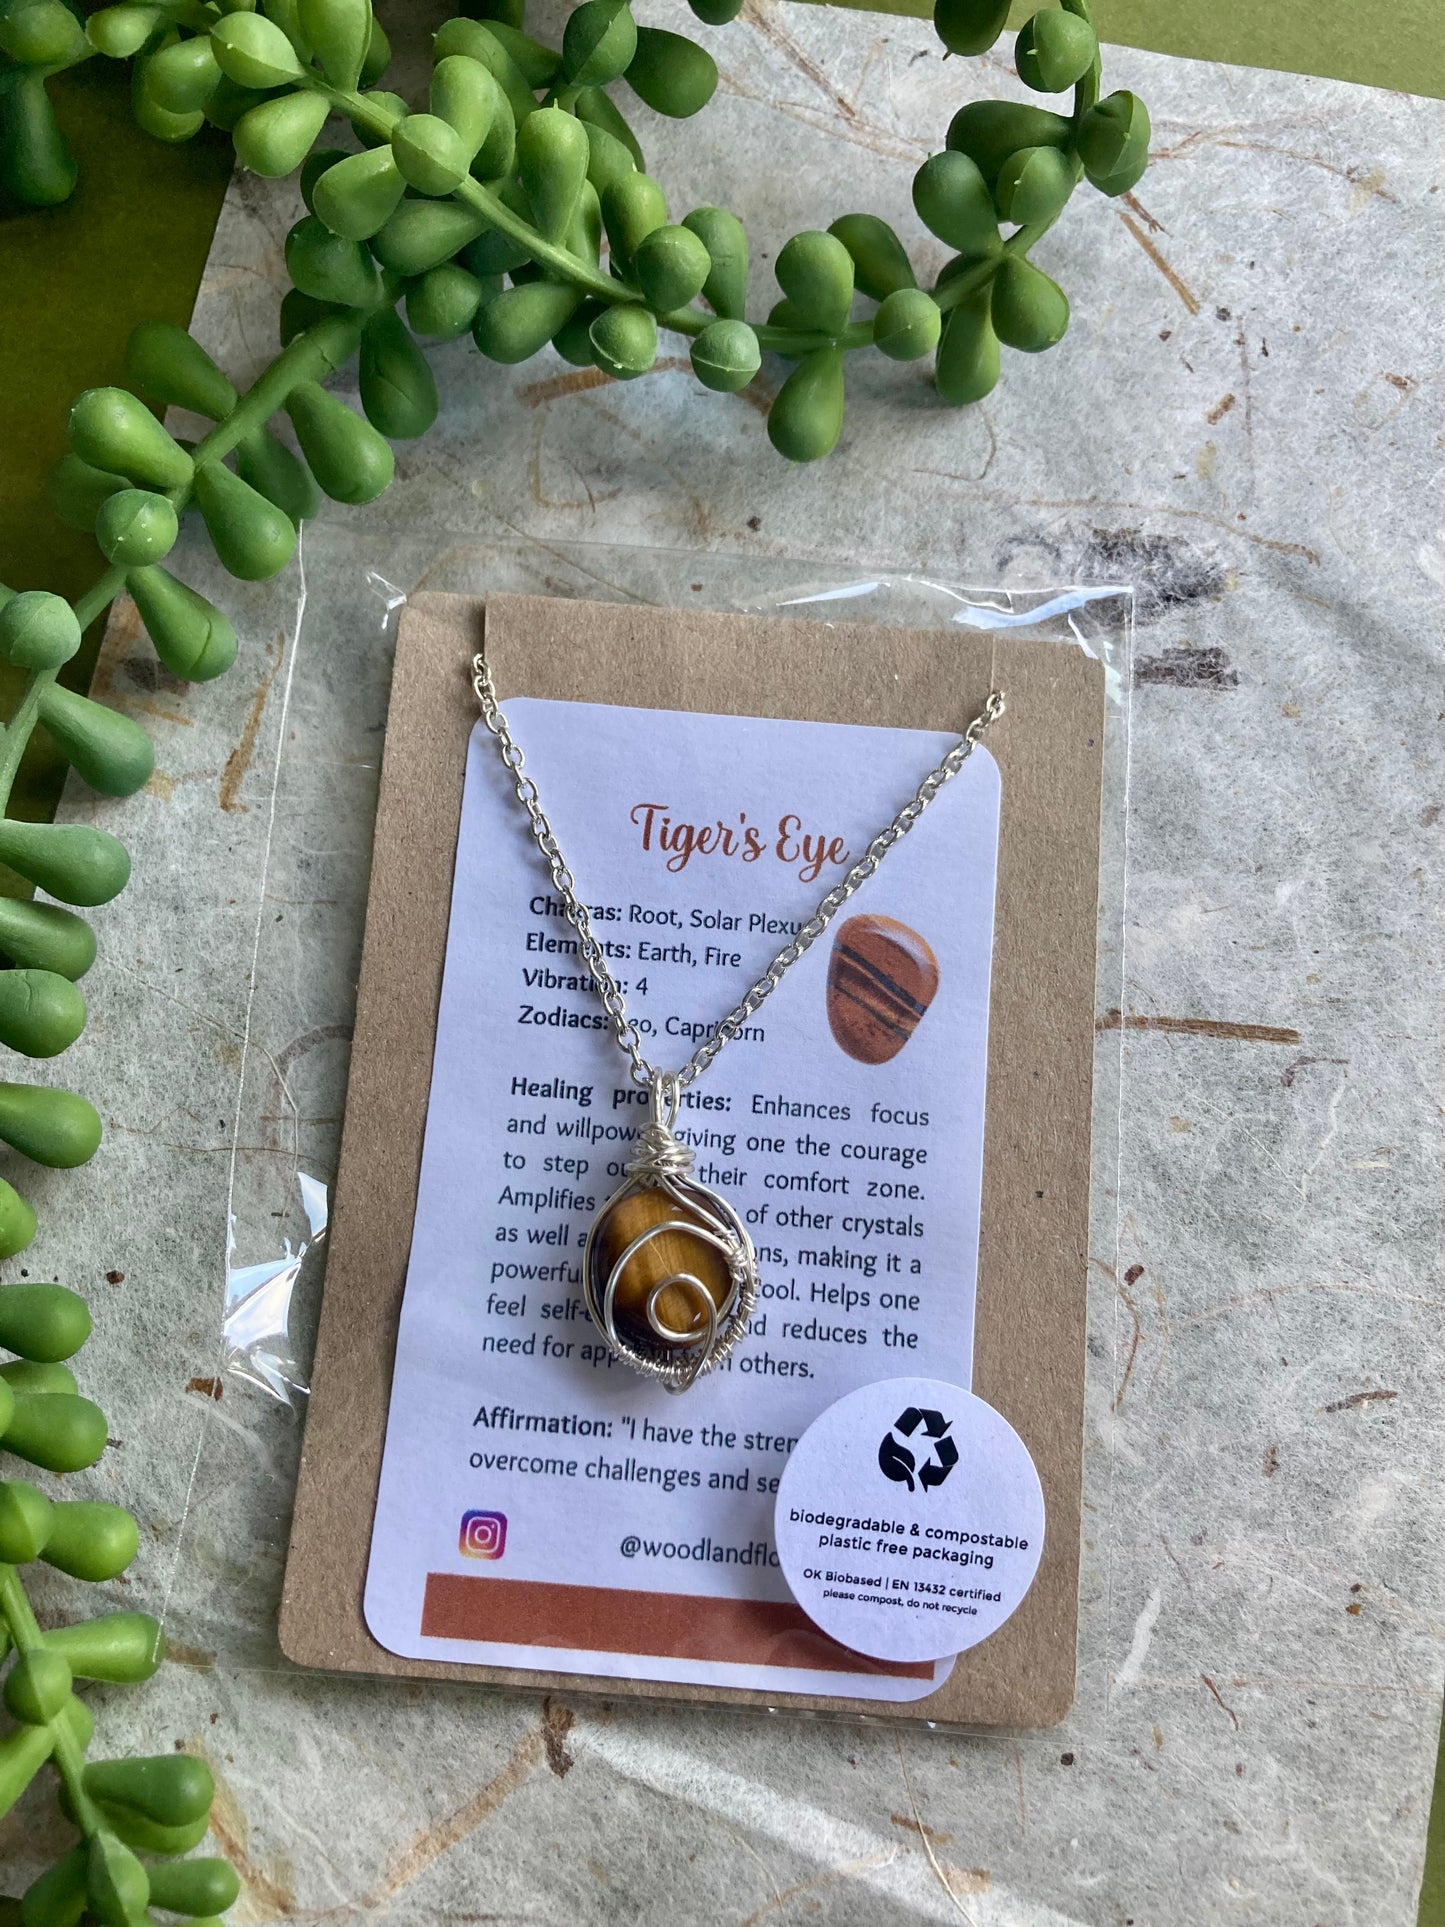 Tiger eye pendant handmade necklace wire wrapped natural stone with 18 inch length chain